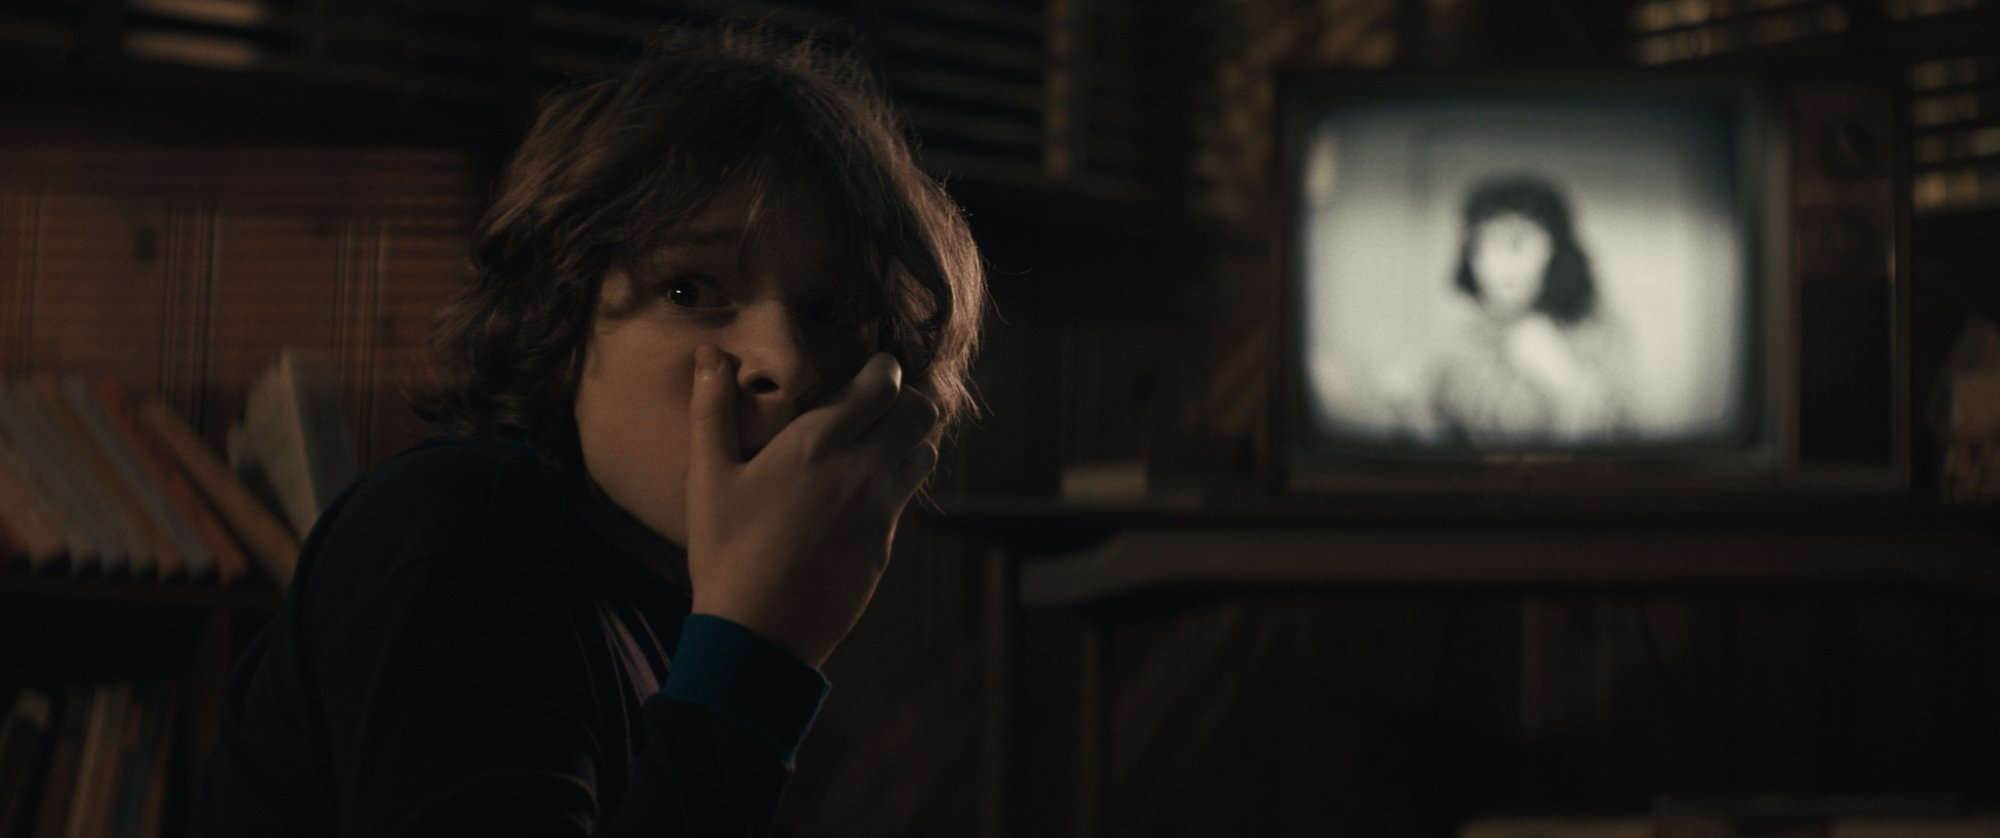 'The Black Phone' Mason Thames as Finney Shaw, which will include new Blumhouse intro with Easter eggs. He's holding his hand over his mouth in front of a television screen.